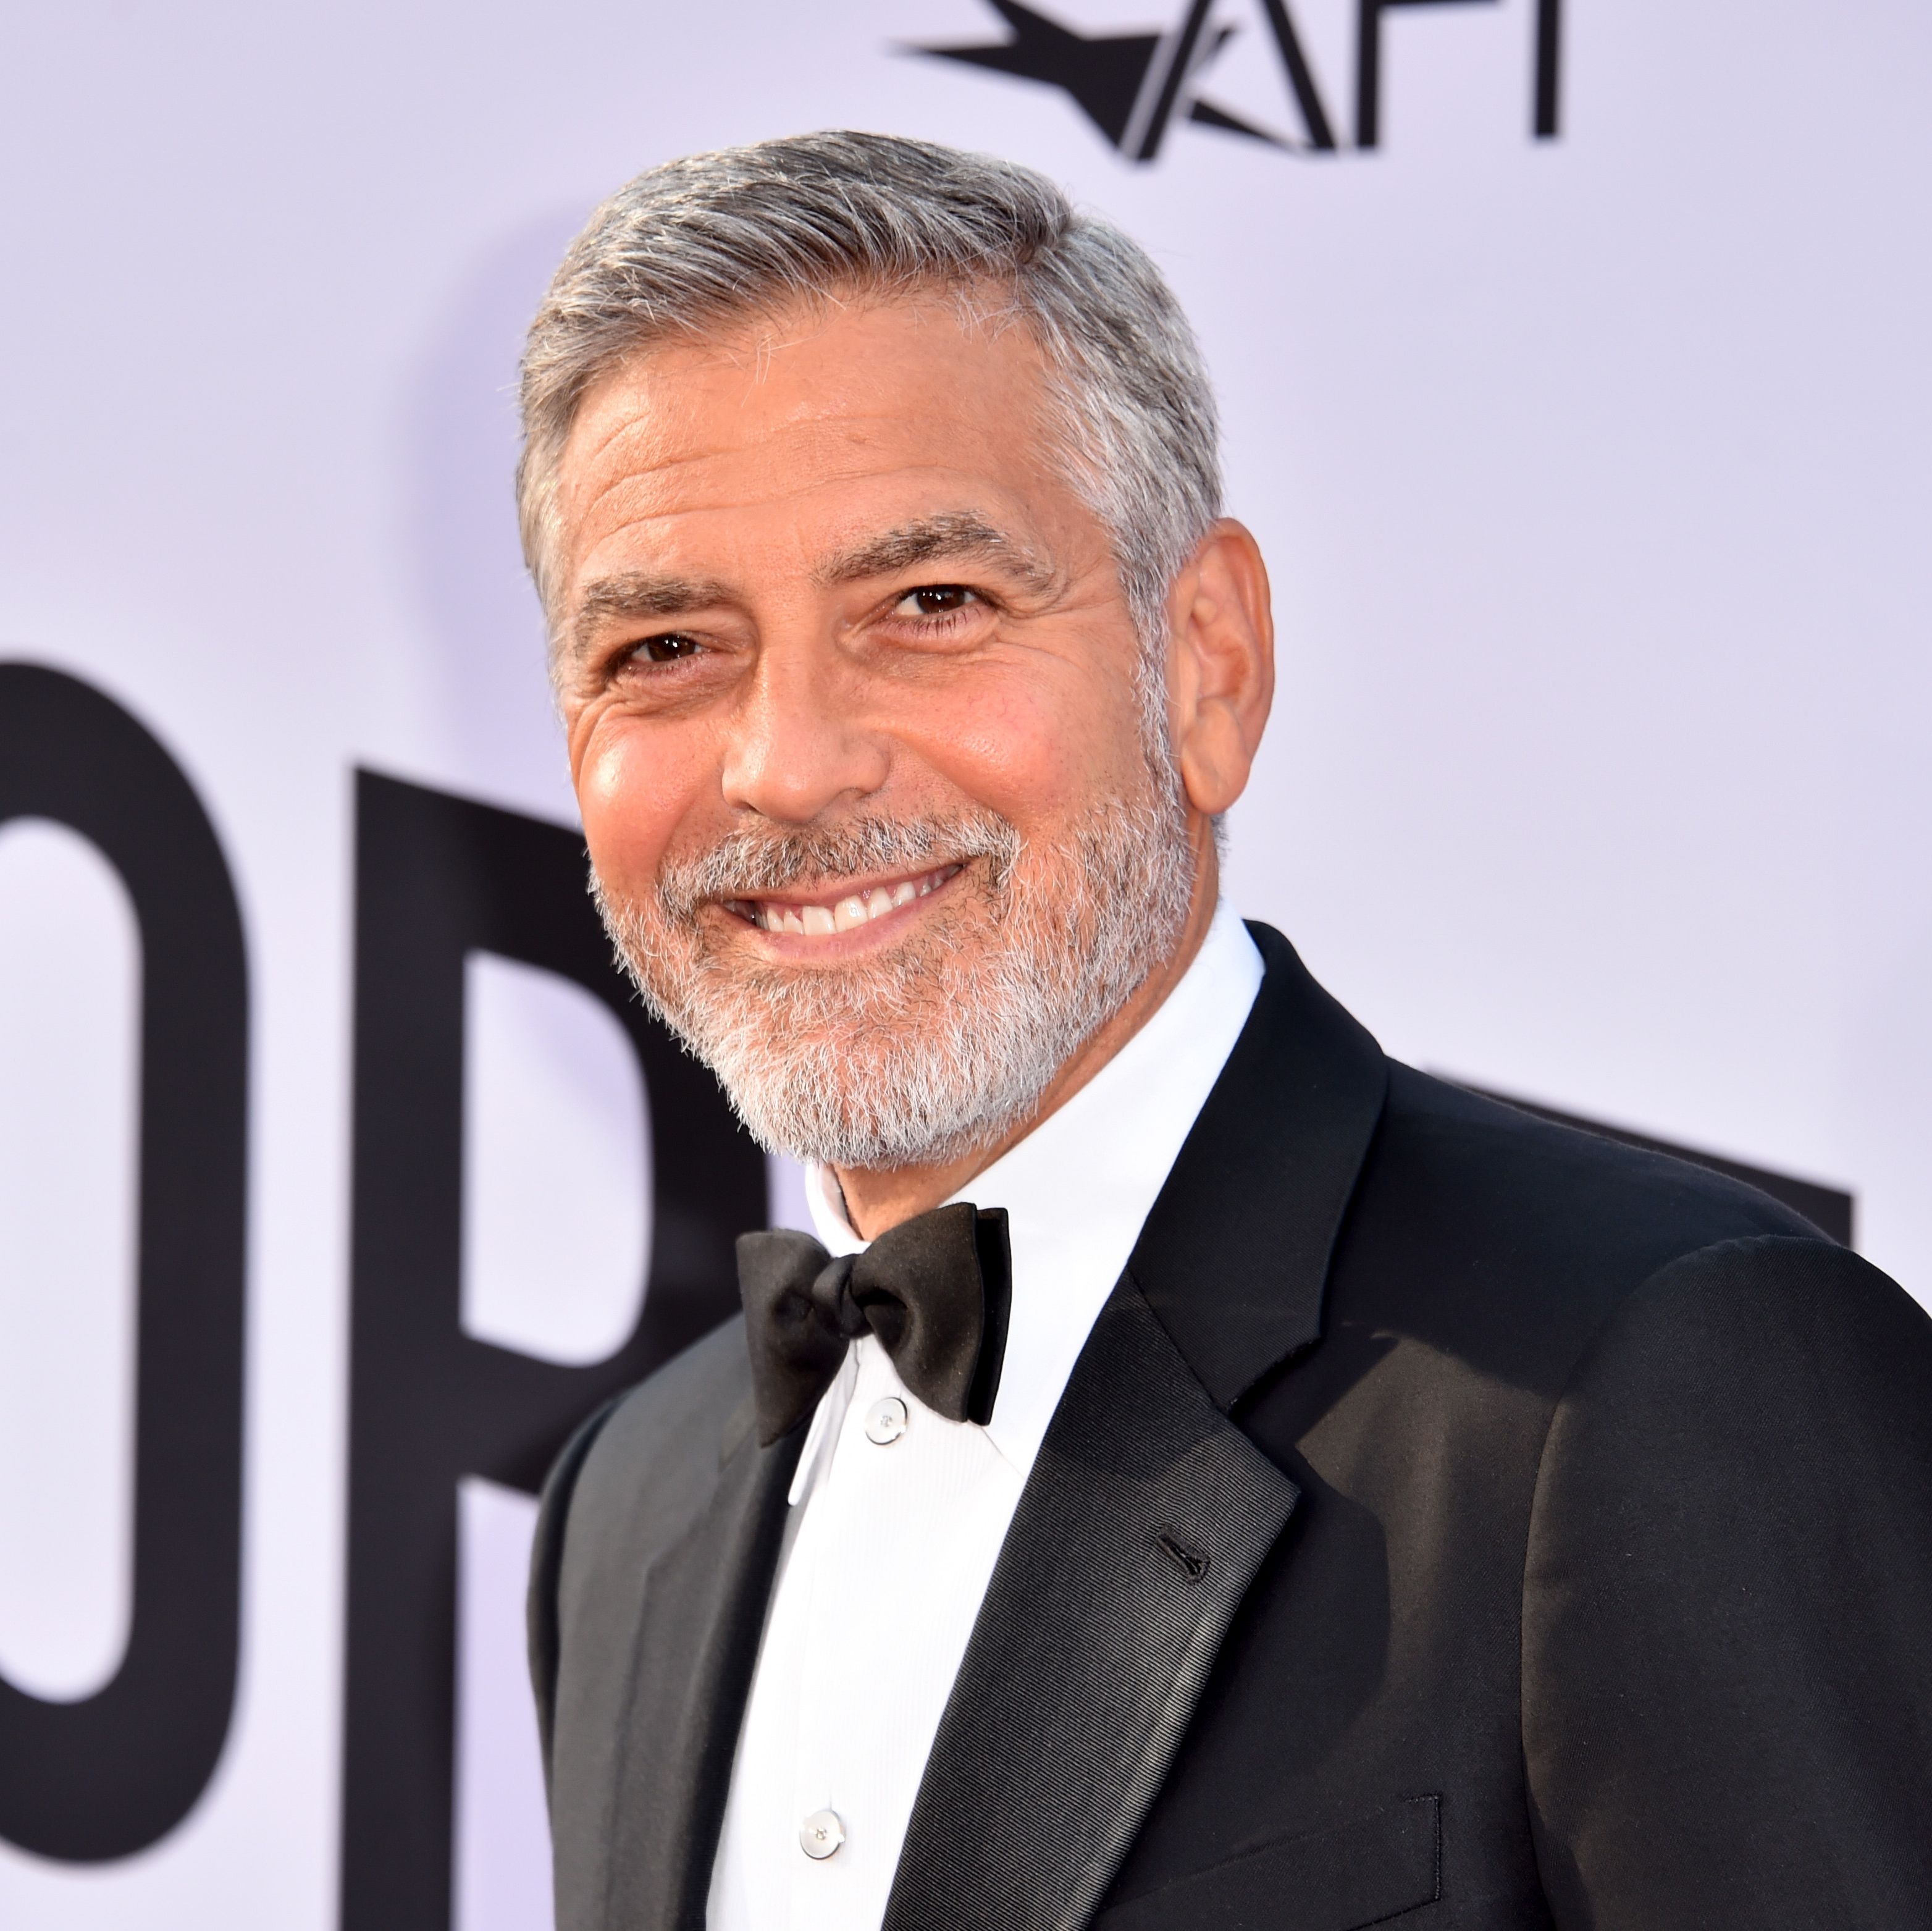 George Clooney Once Turned Down $35 Million for a Single Day of Work